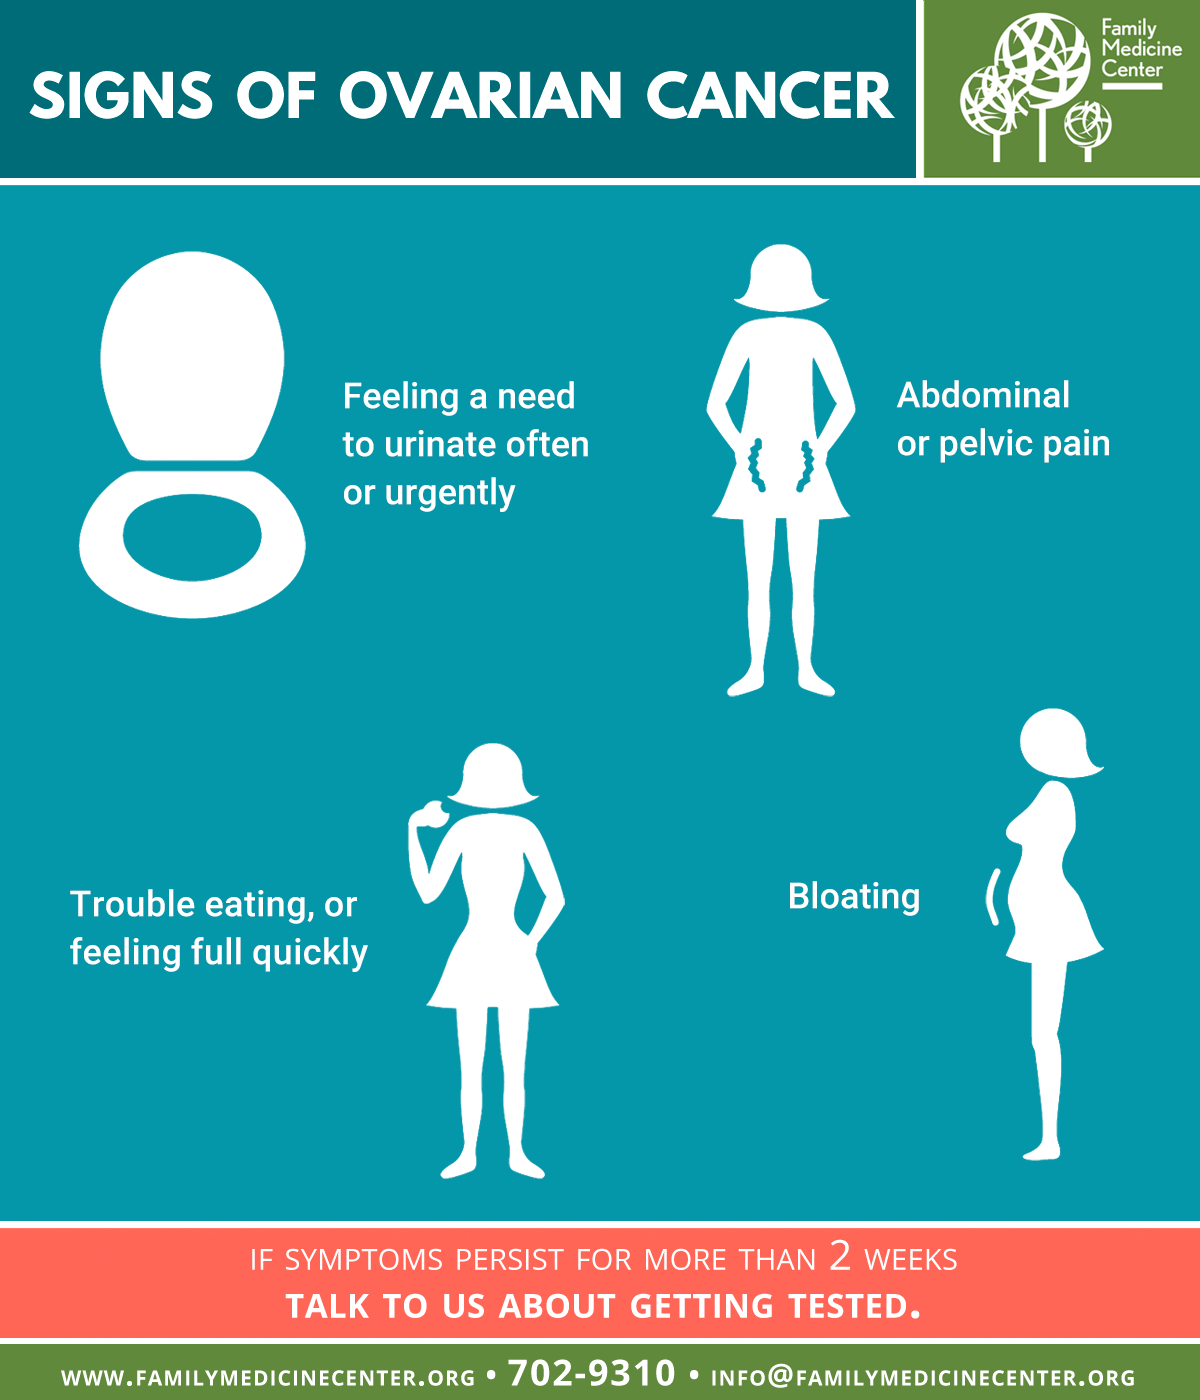 Signs of Ovarian Cancer - Family Medicine Center